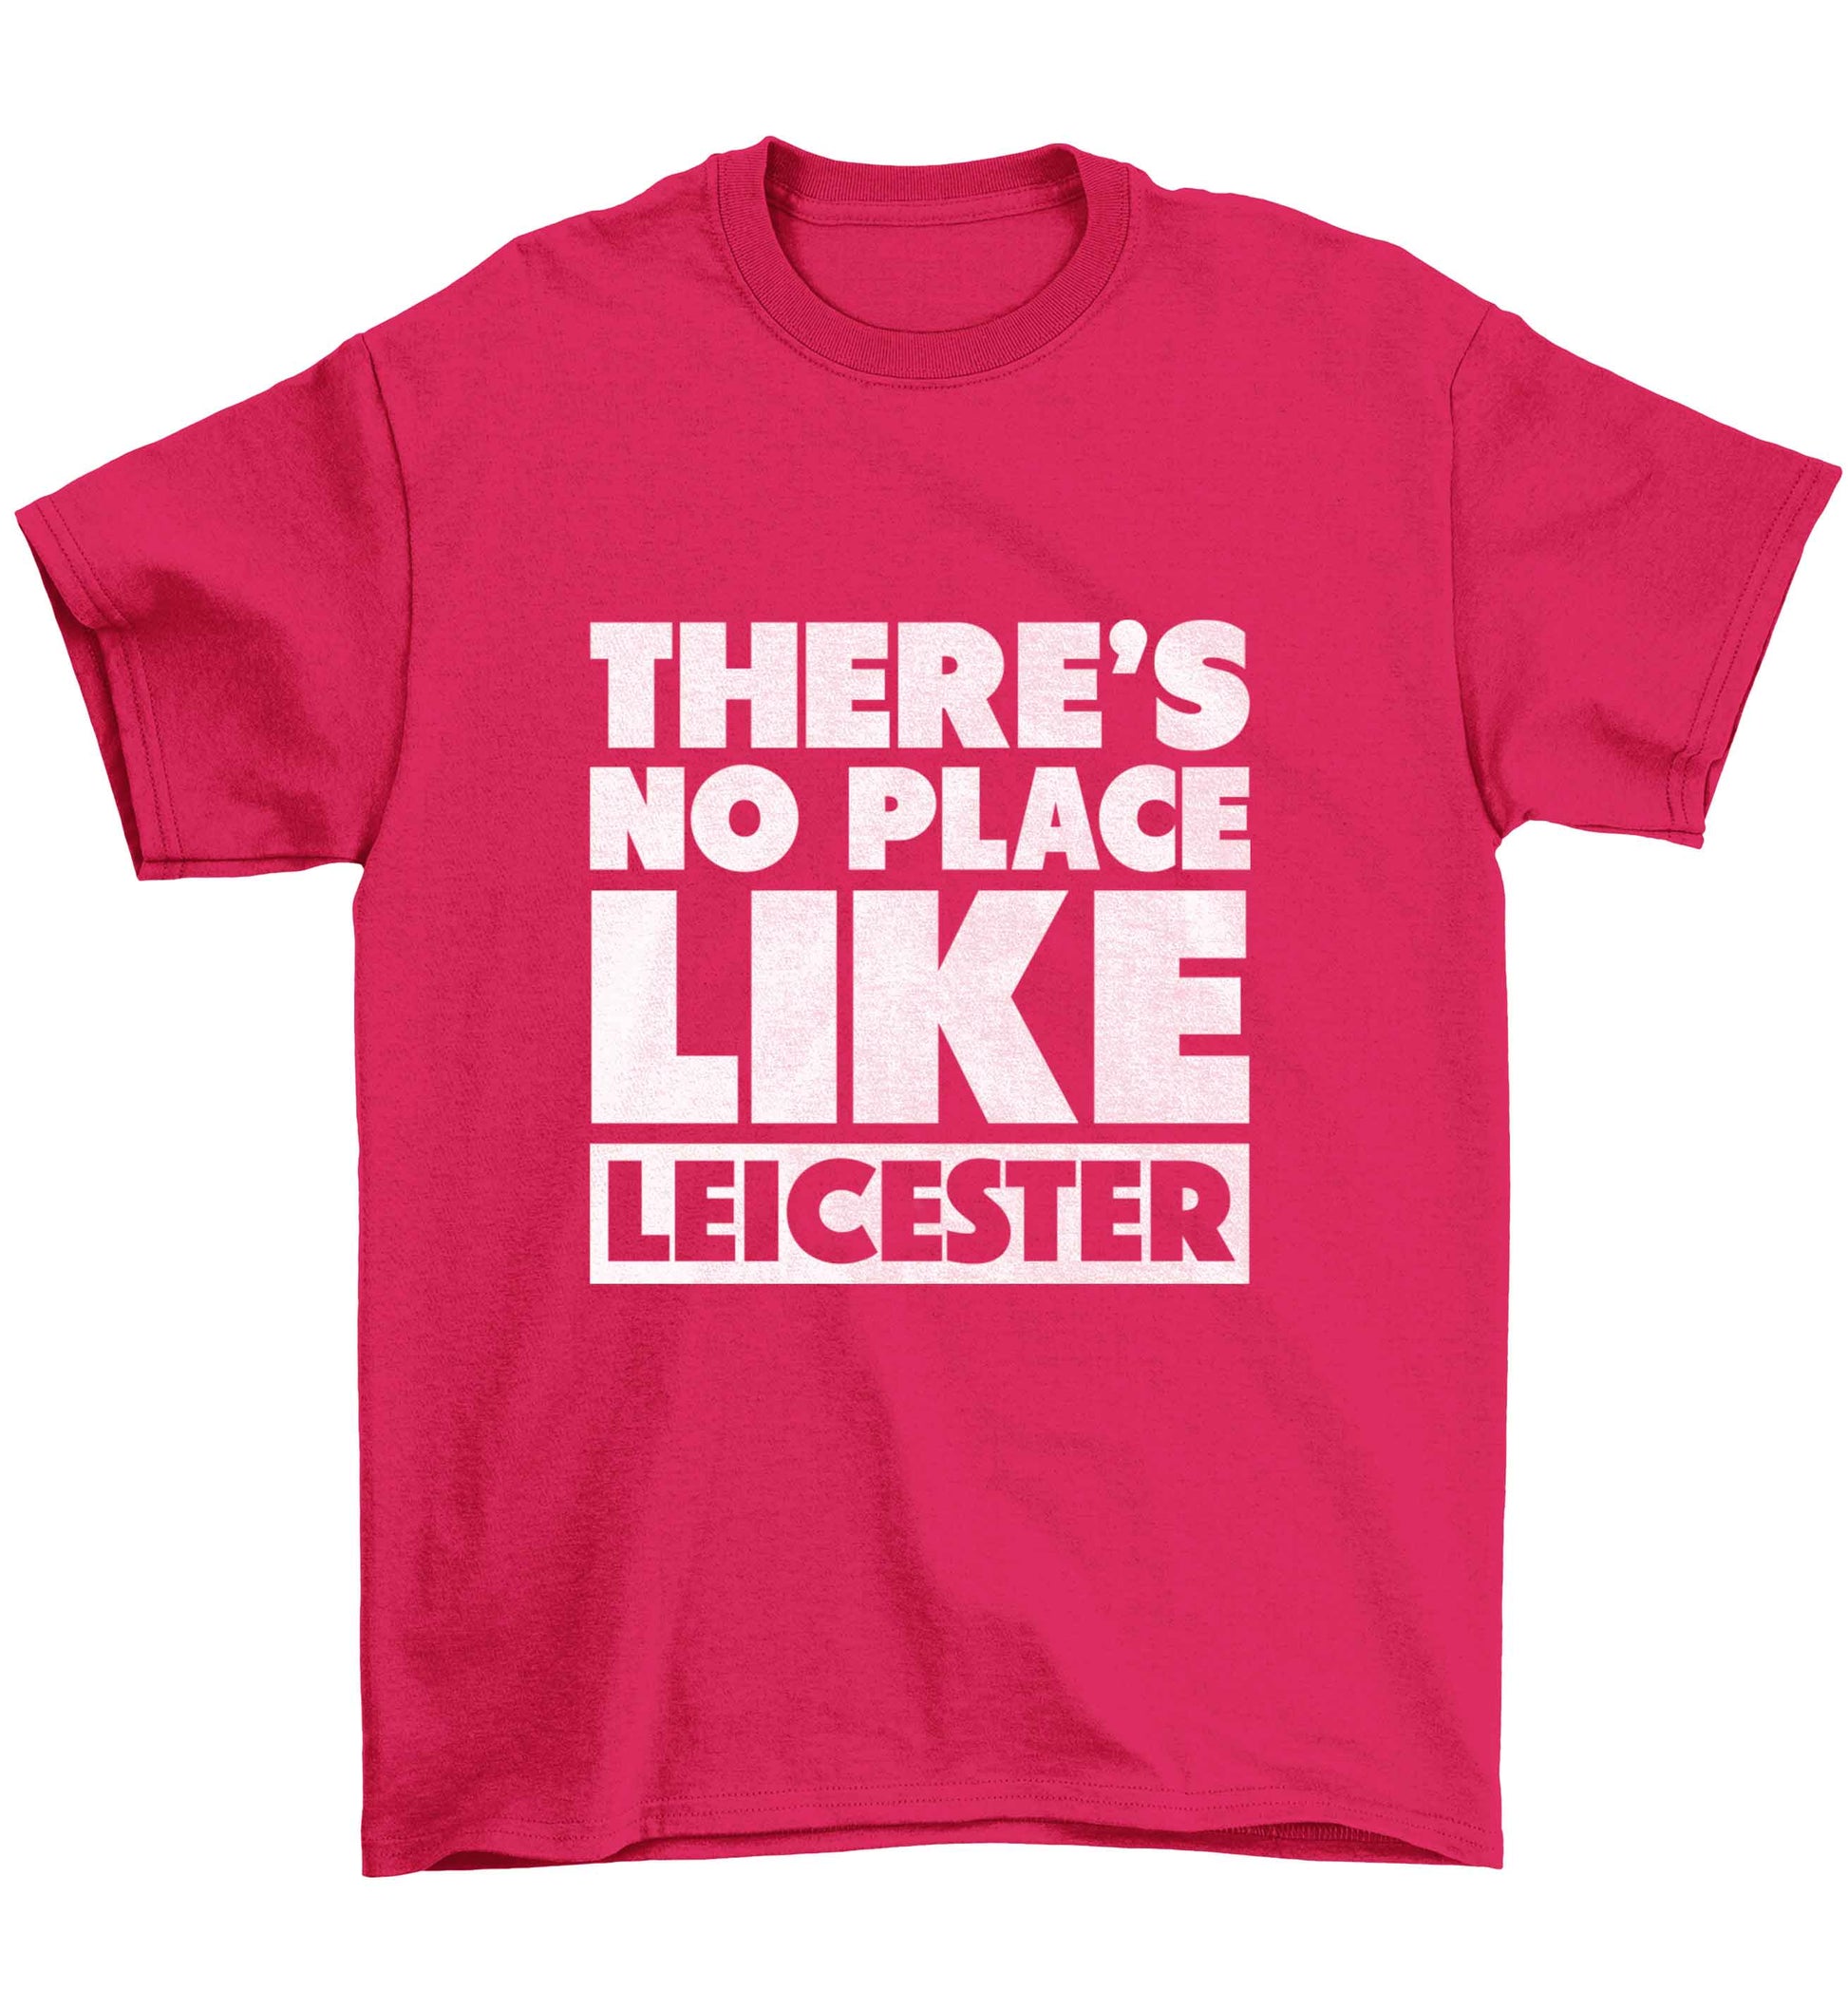 There's no place like Leicester Children's pink Tshirt 12-13 Years